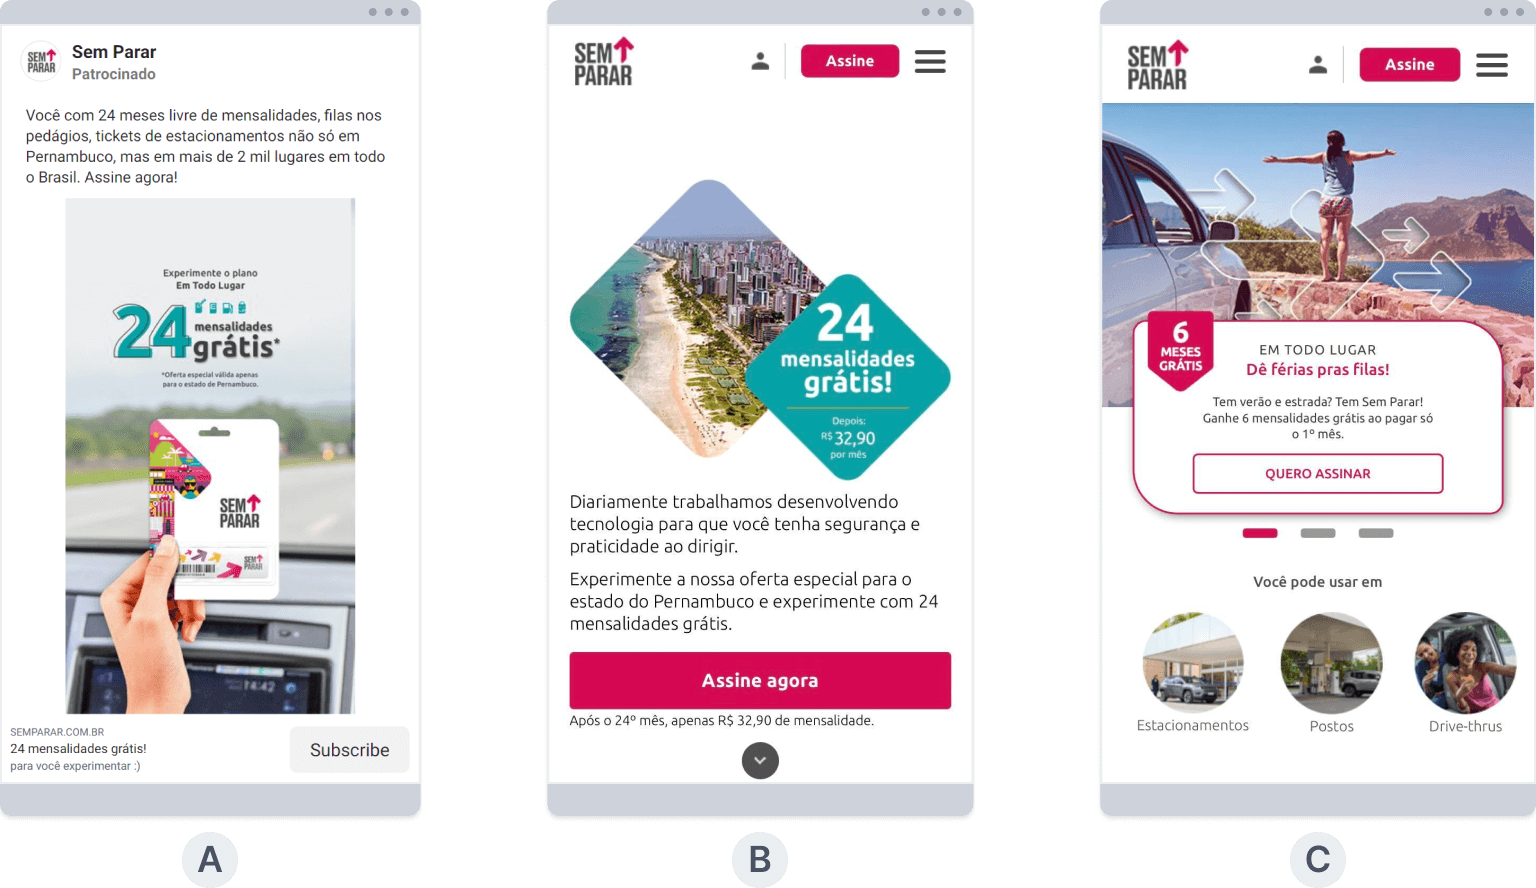 Image showing 3 screens from a mobile phone: the add, the landing page, and the old home page.